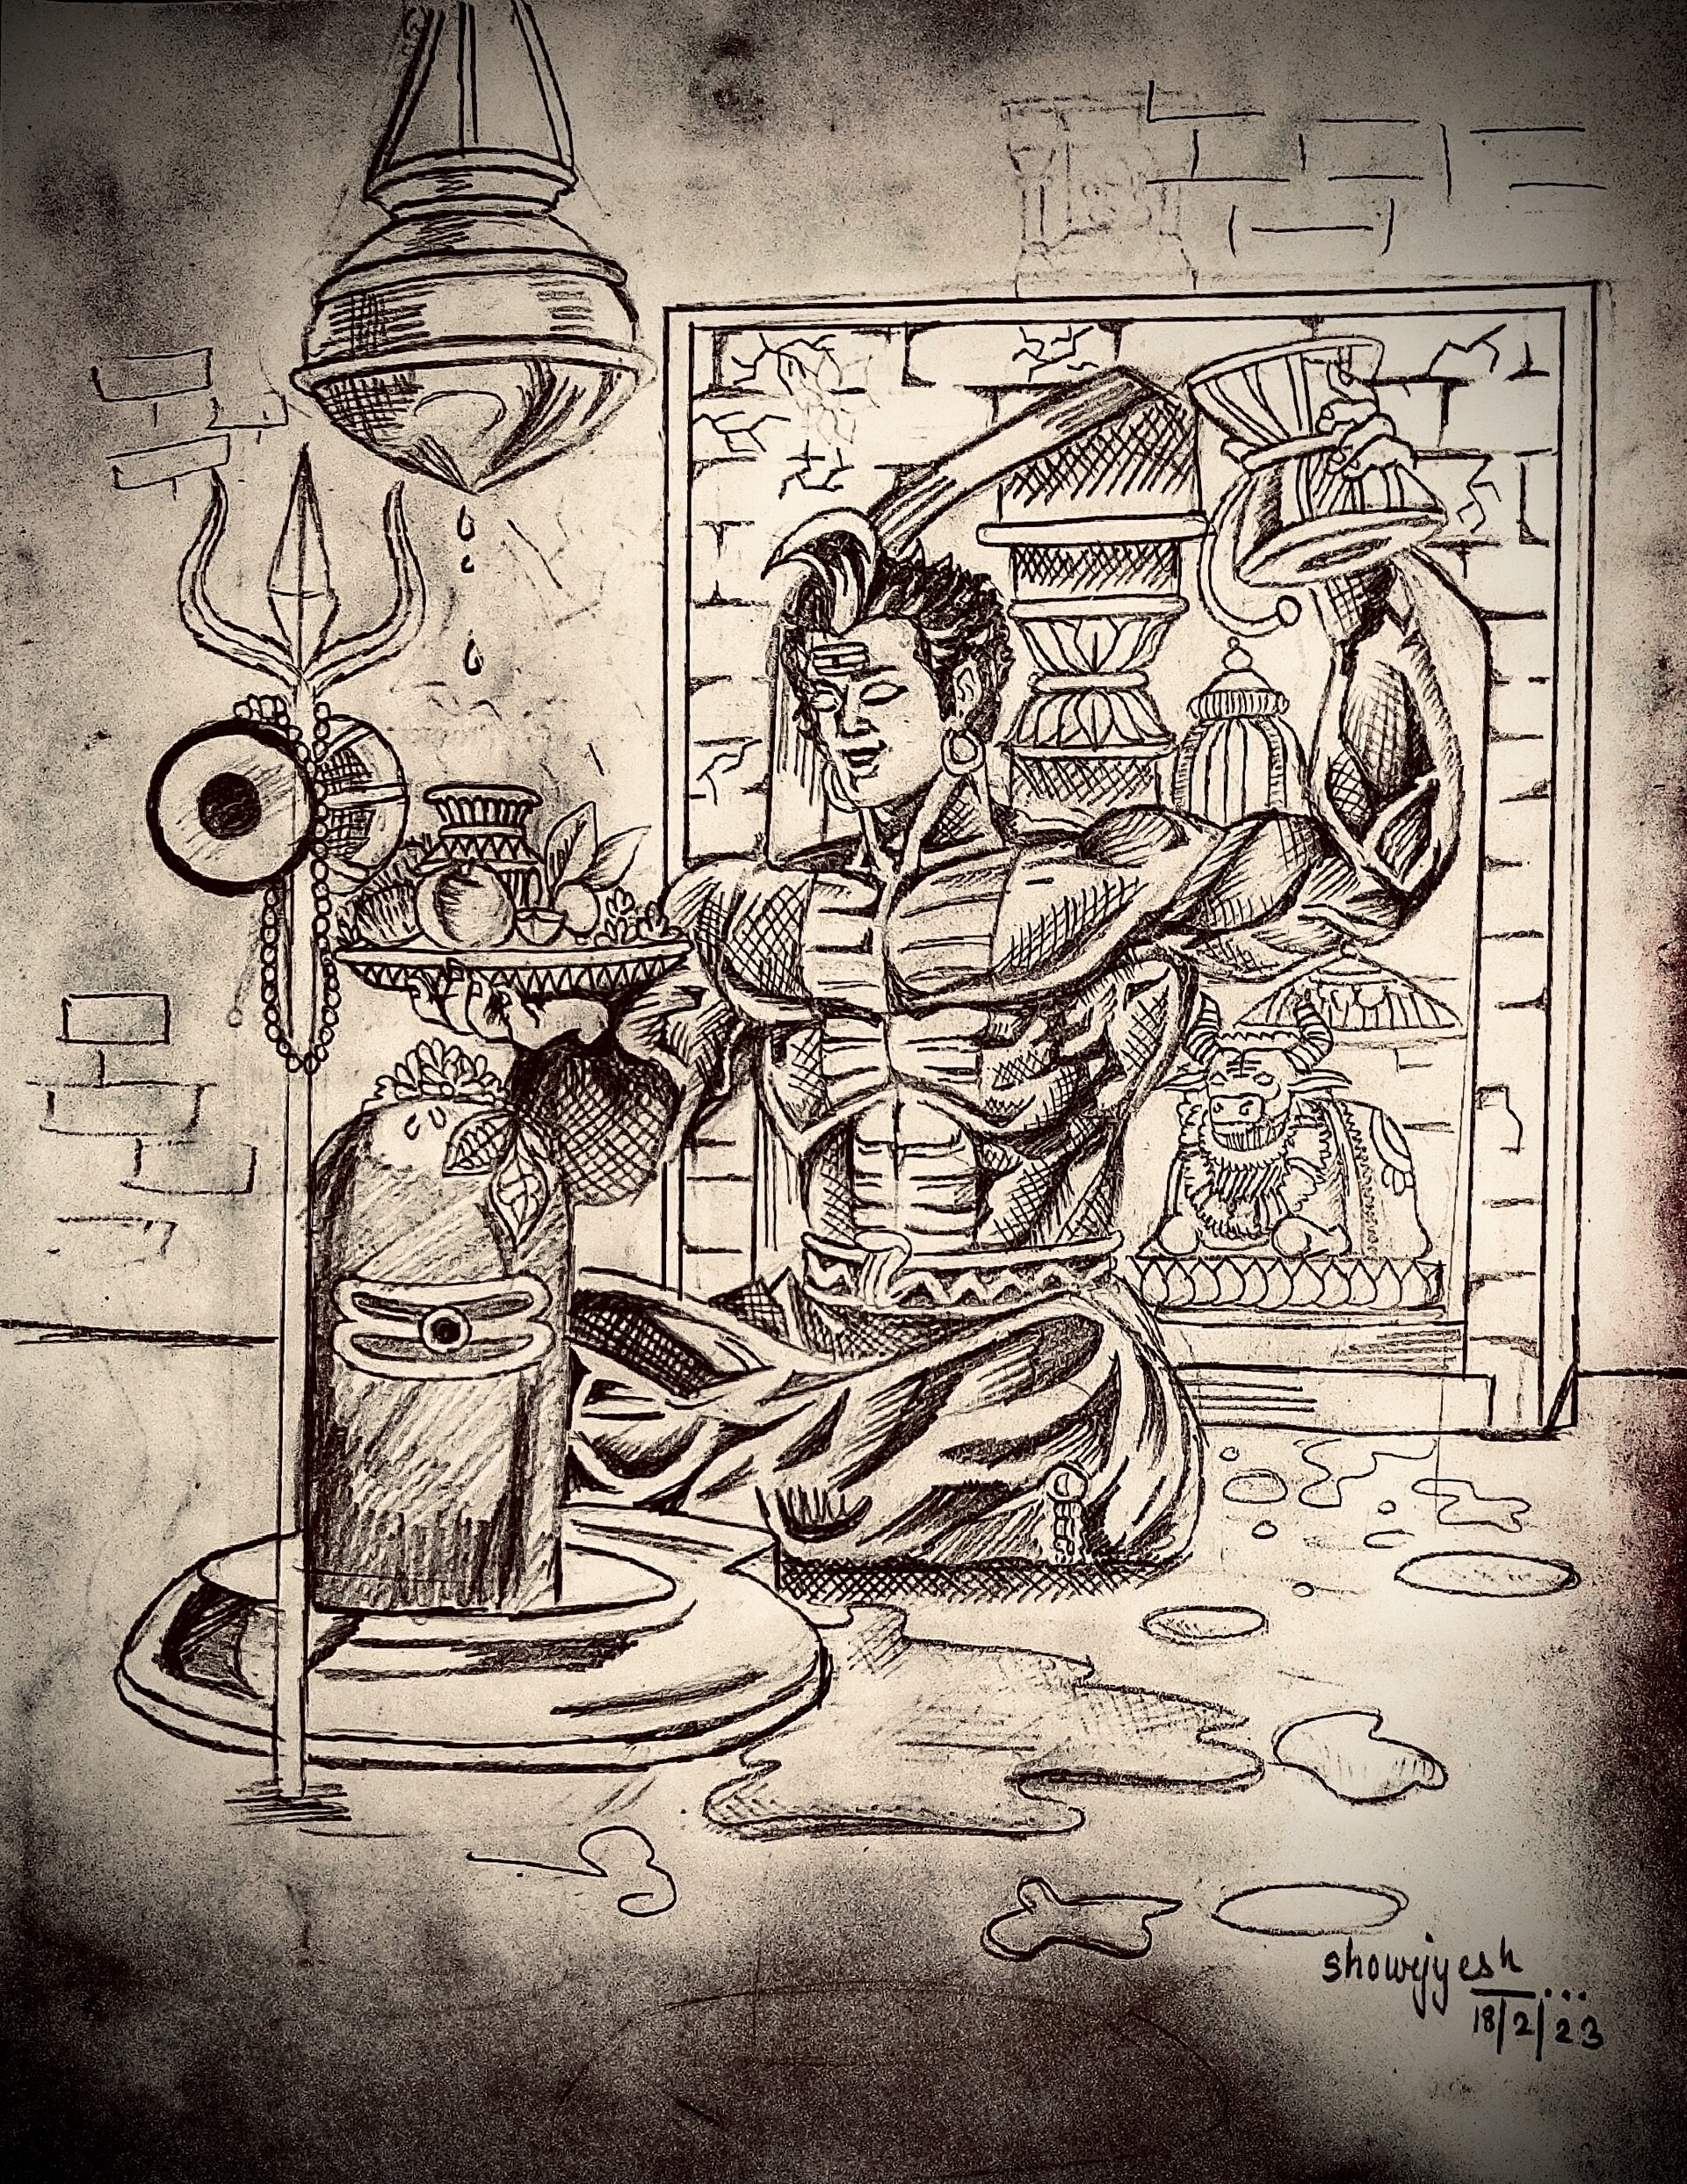 Awesome Pencil Sketch Of Lord Shiva - Desi Painters